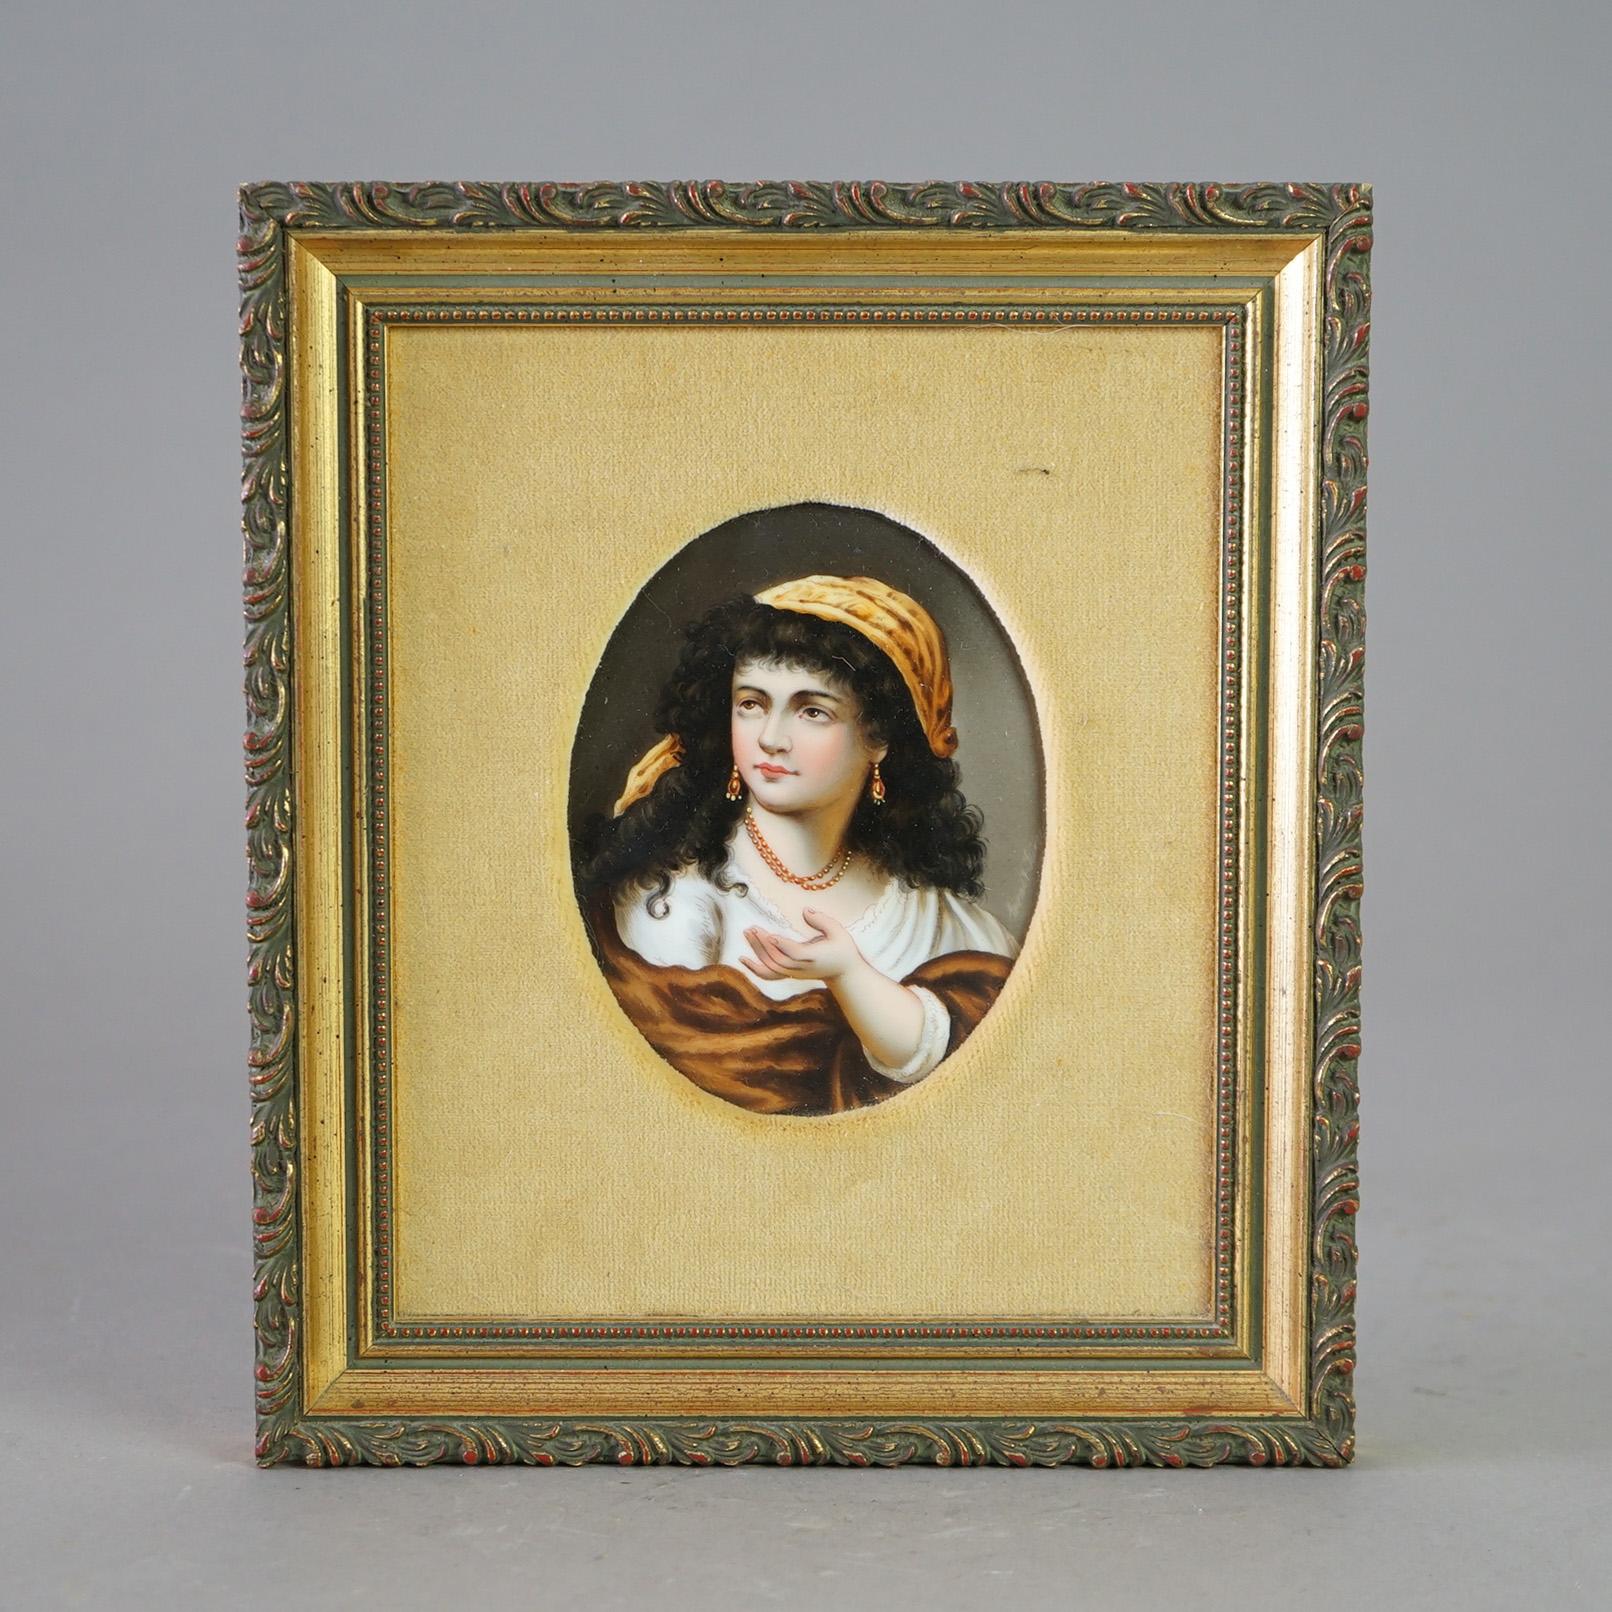 Gilt Antique KPM School Portrait Painting on Porcelain of Gypsy Girl Late 19th C For Sale